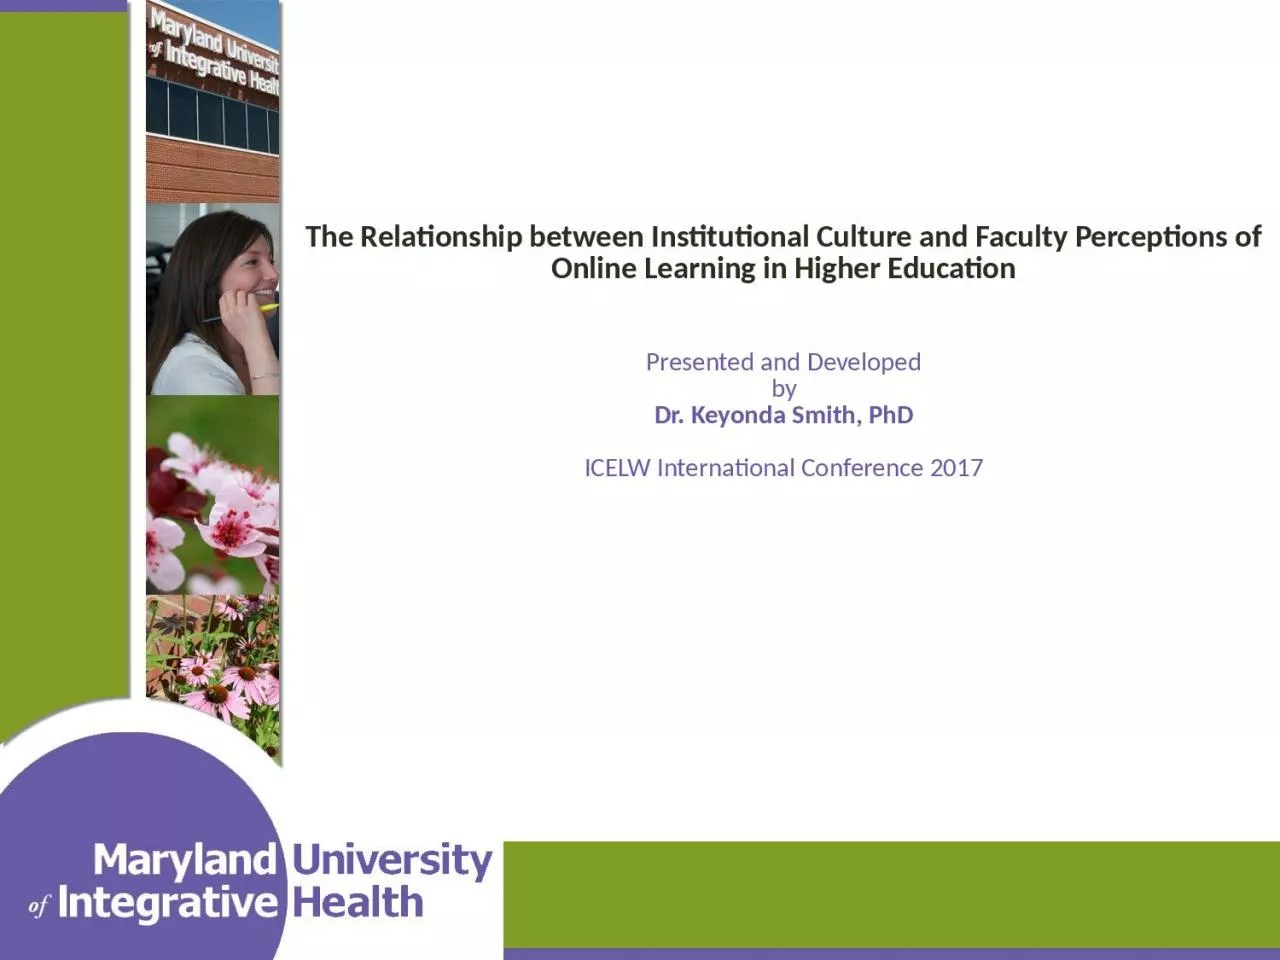 The Relationship between Institutional Culture and Faculty Perceptions of Online Learning